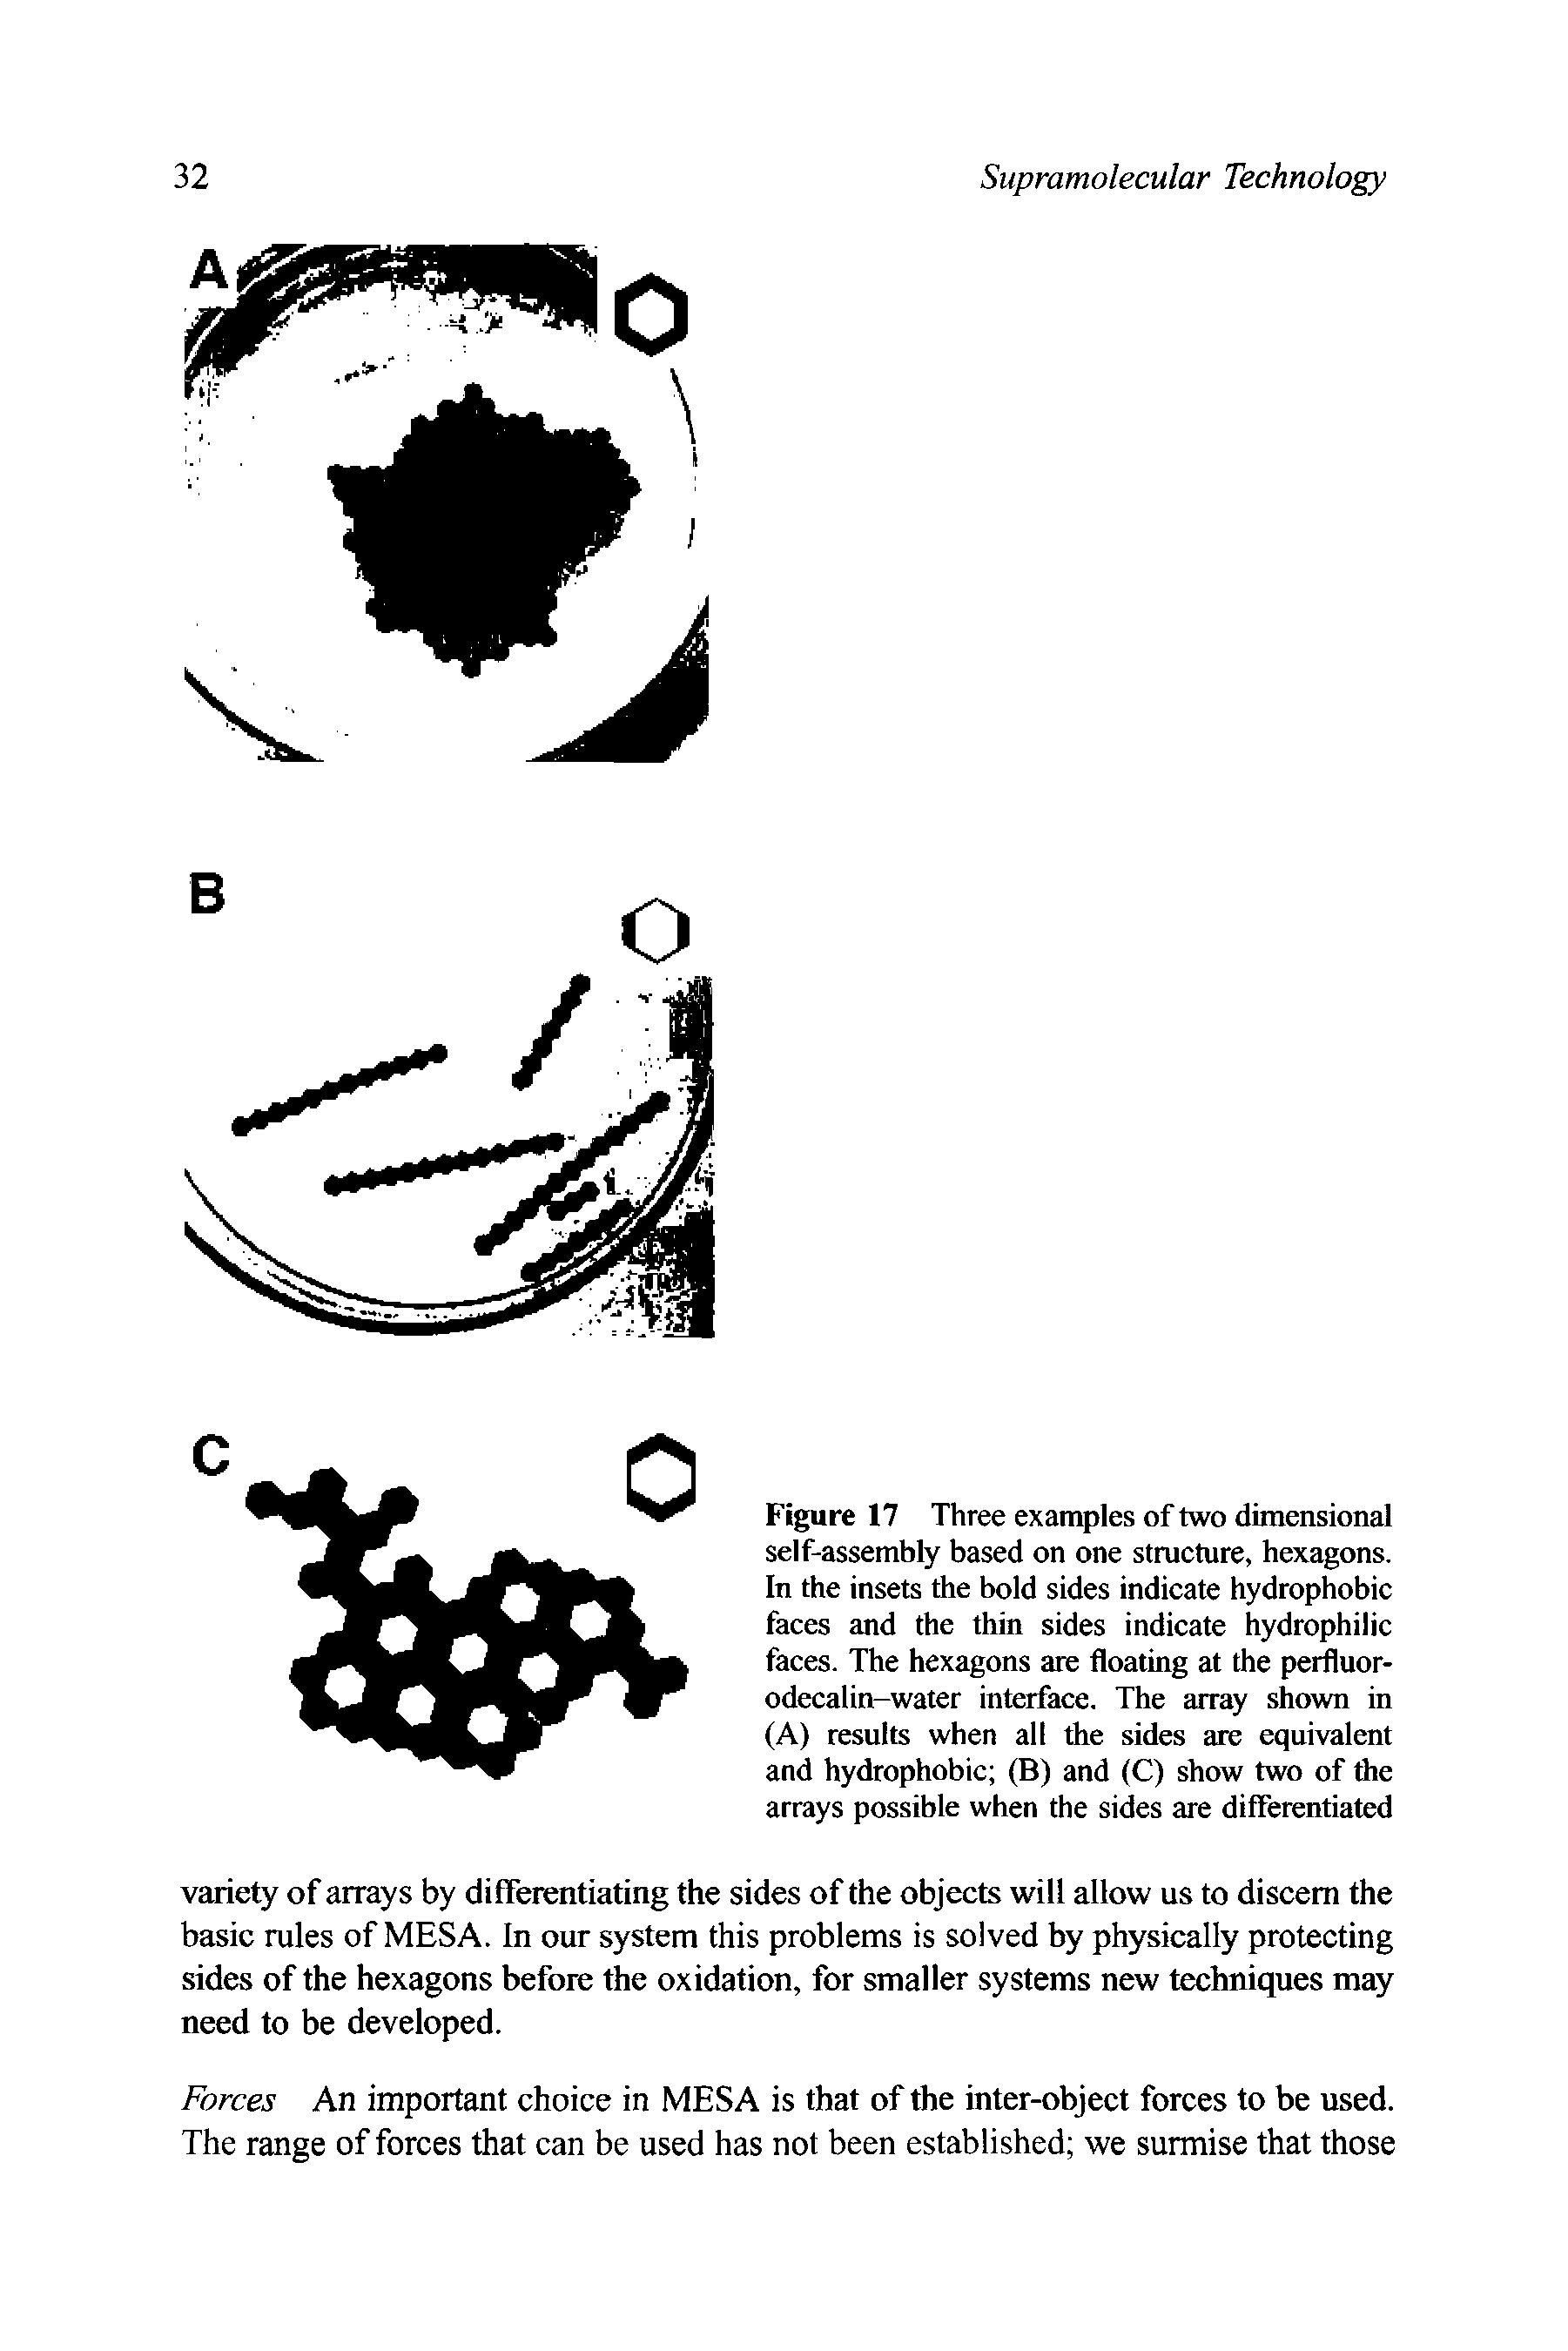 Figure 17 Three examples of two dimensional self-assembly based on one structure, hexagons. In the insets the bold sides indicate hydrophobic faces and the thin sides indicate hydrophilic faces. The hexagons are floating at the perSfluor-odecalin-water interface. The array shown in (A) results when all the sides are equivalent and hydrophobic (B) and (C) show two of the arrays possible when the sides are differentiated...